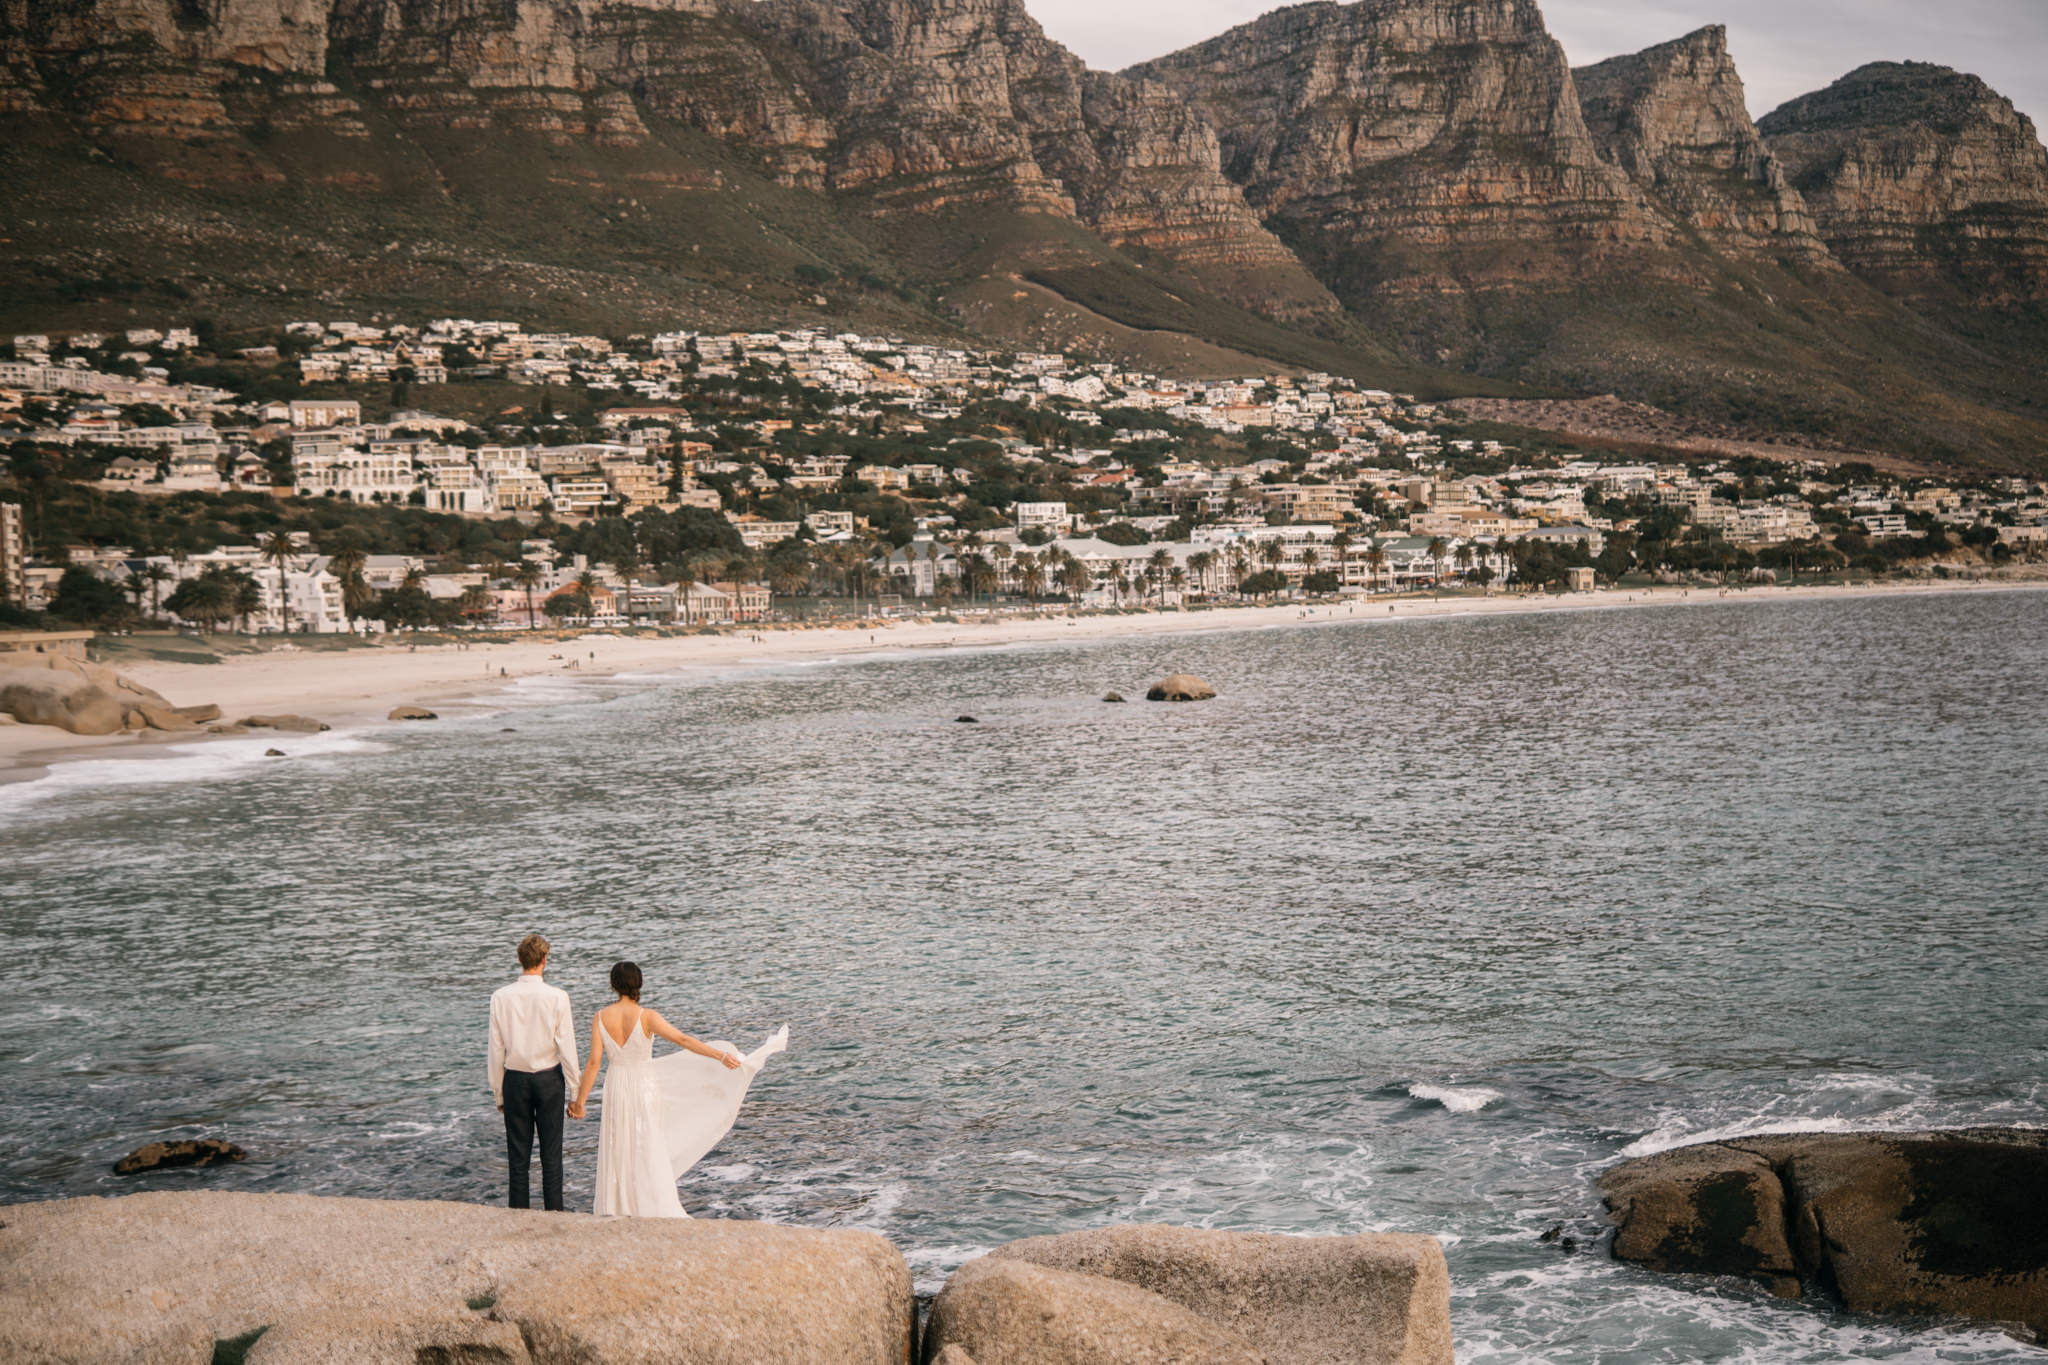 A bride and groom at a destination wedding photography shoot on a rocky beach.